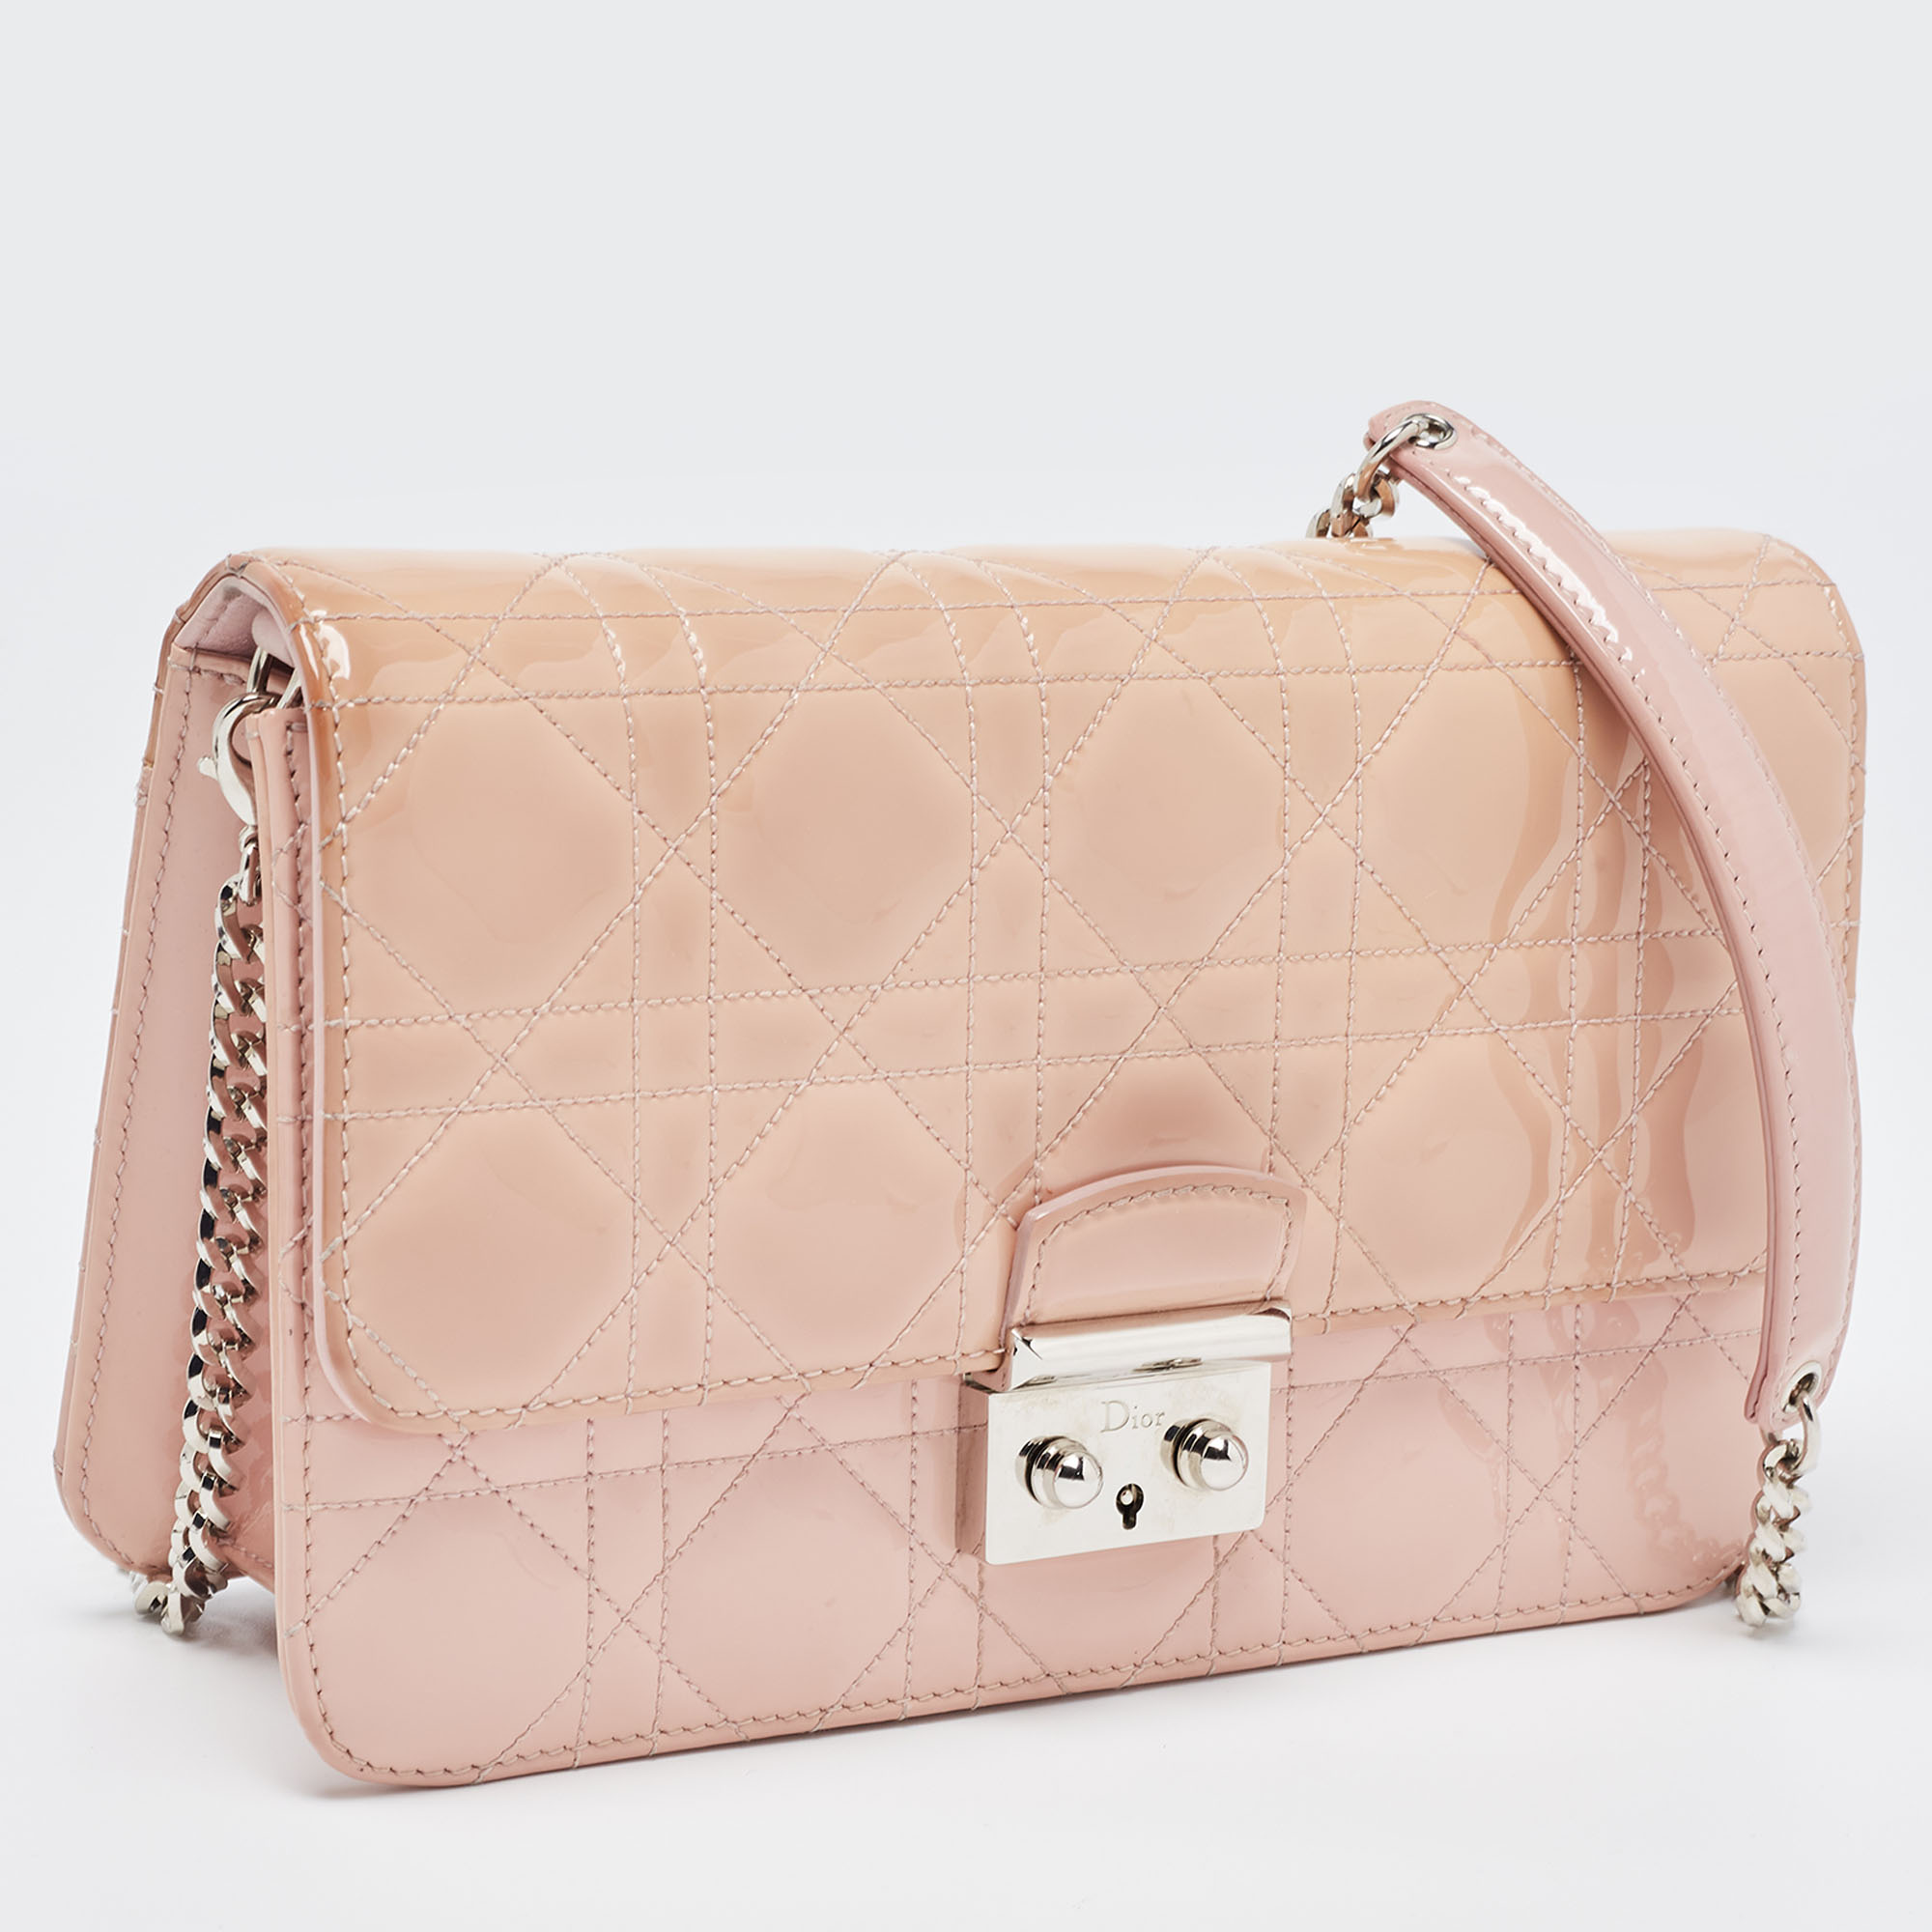 Dior Light Pink Cannage Patent Leather Miss Dior Promenade Chain Bag